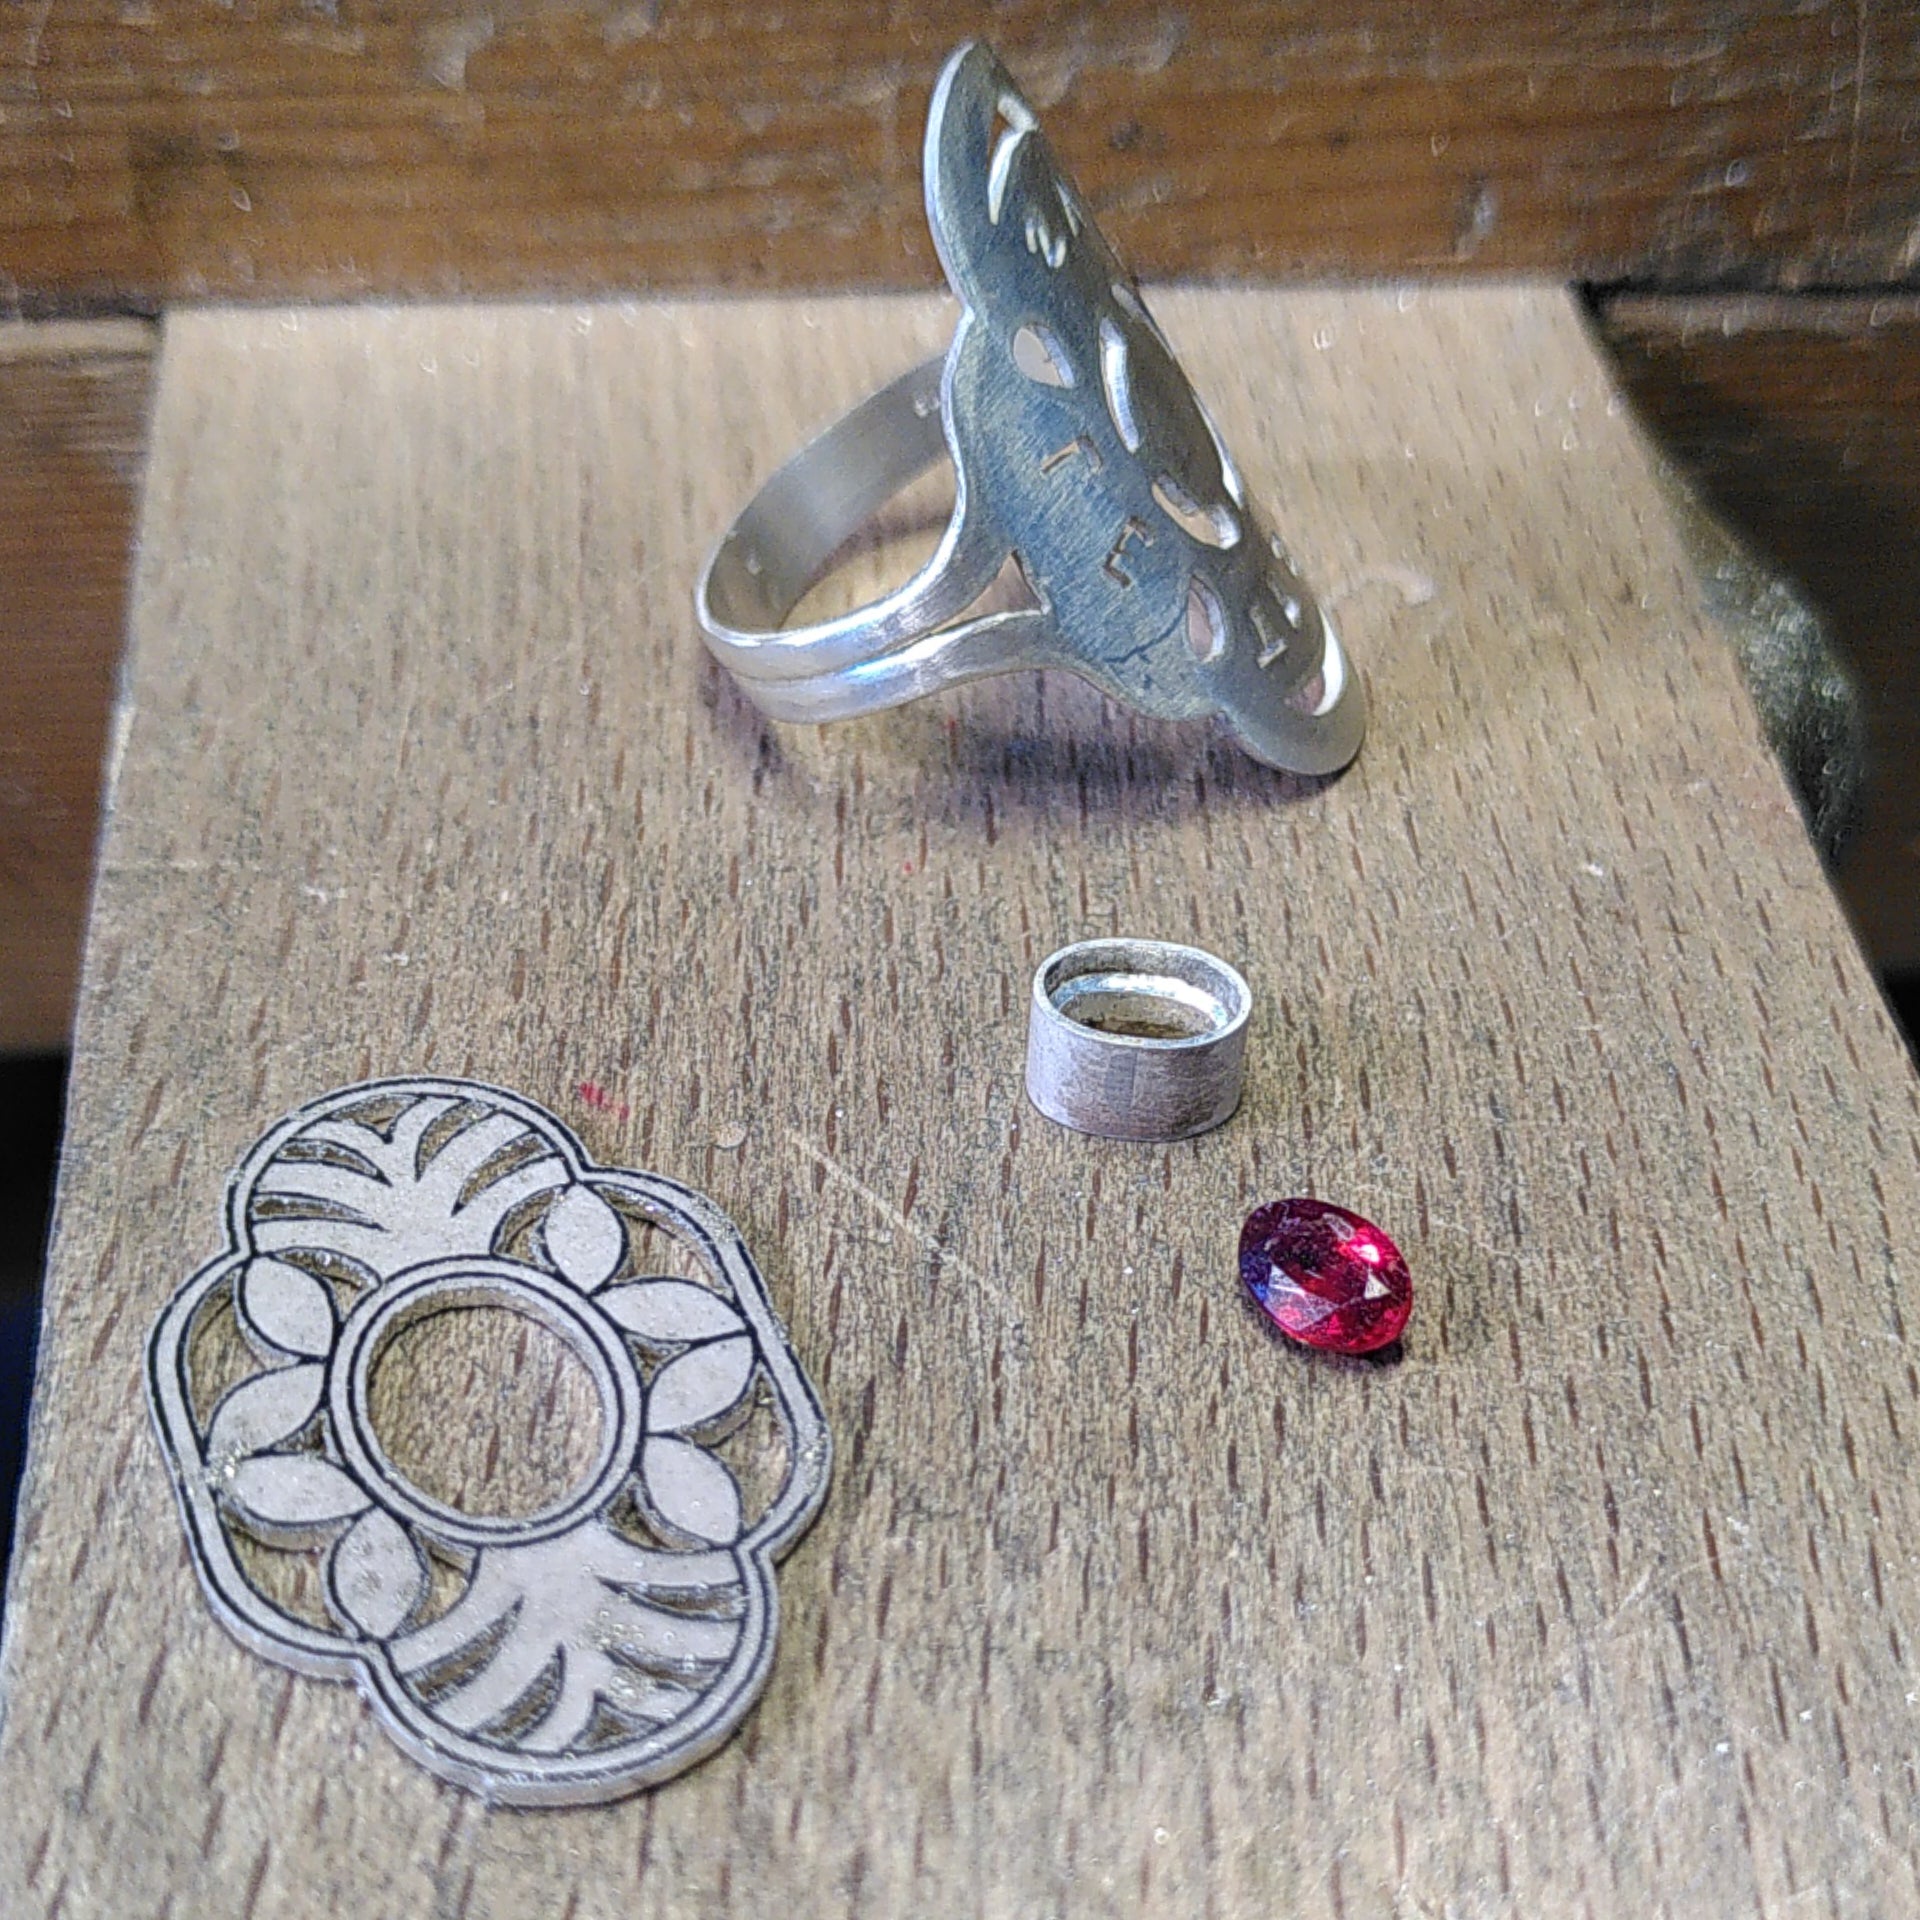 The different silver pieces to be solder to create a Palmier ring, and a red garnet gemstone. Made by hand by Casez Jewellery.